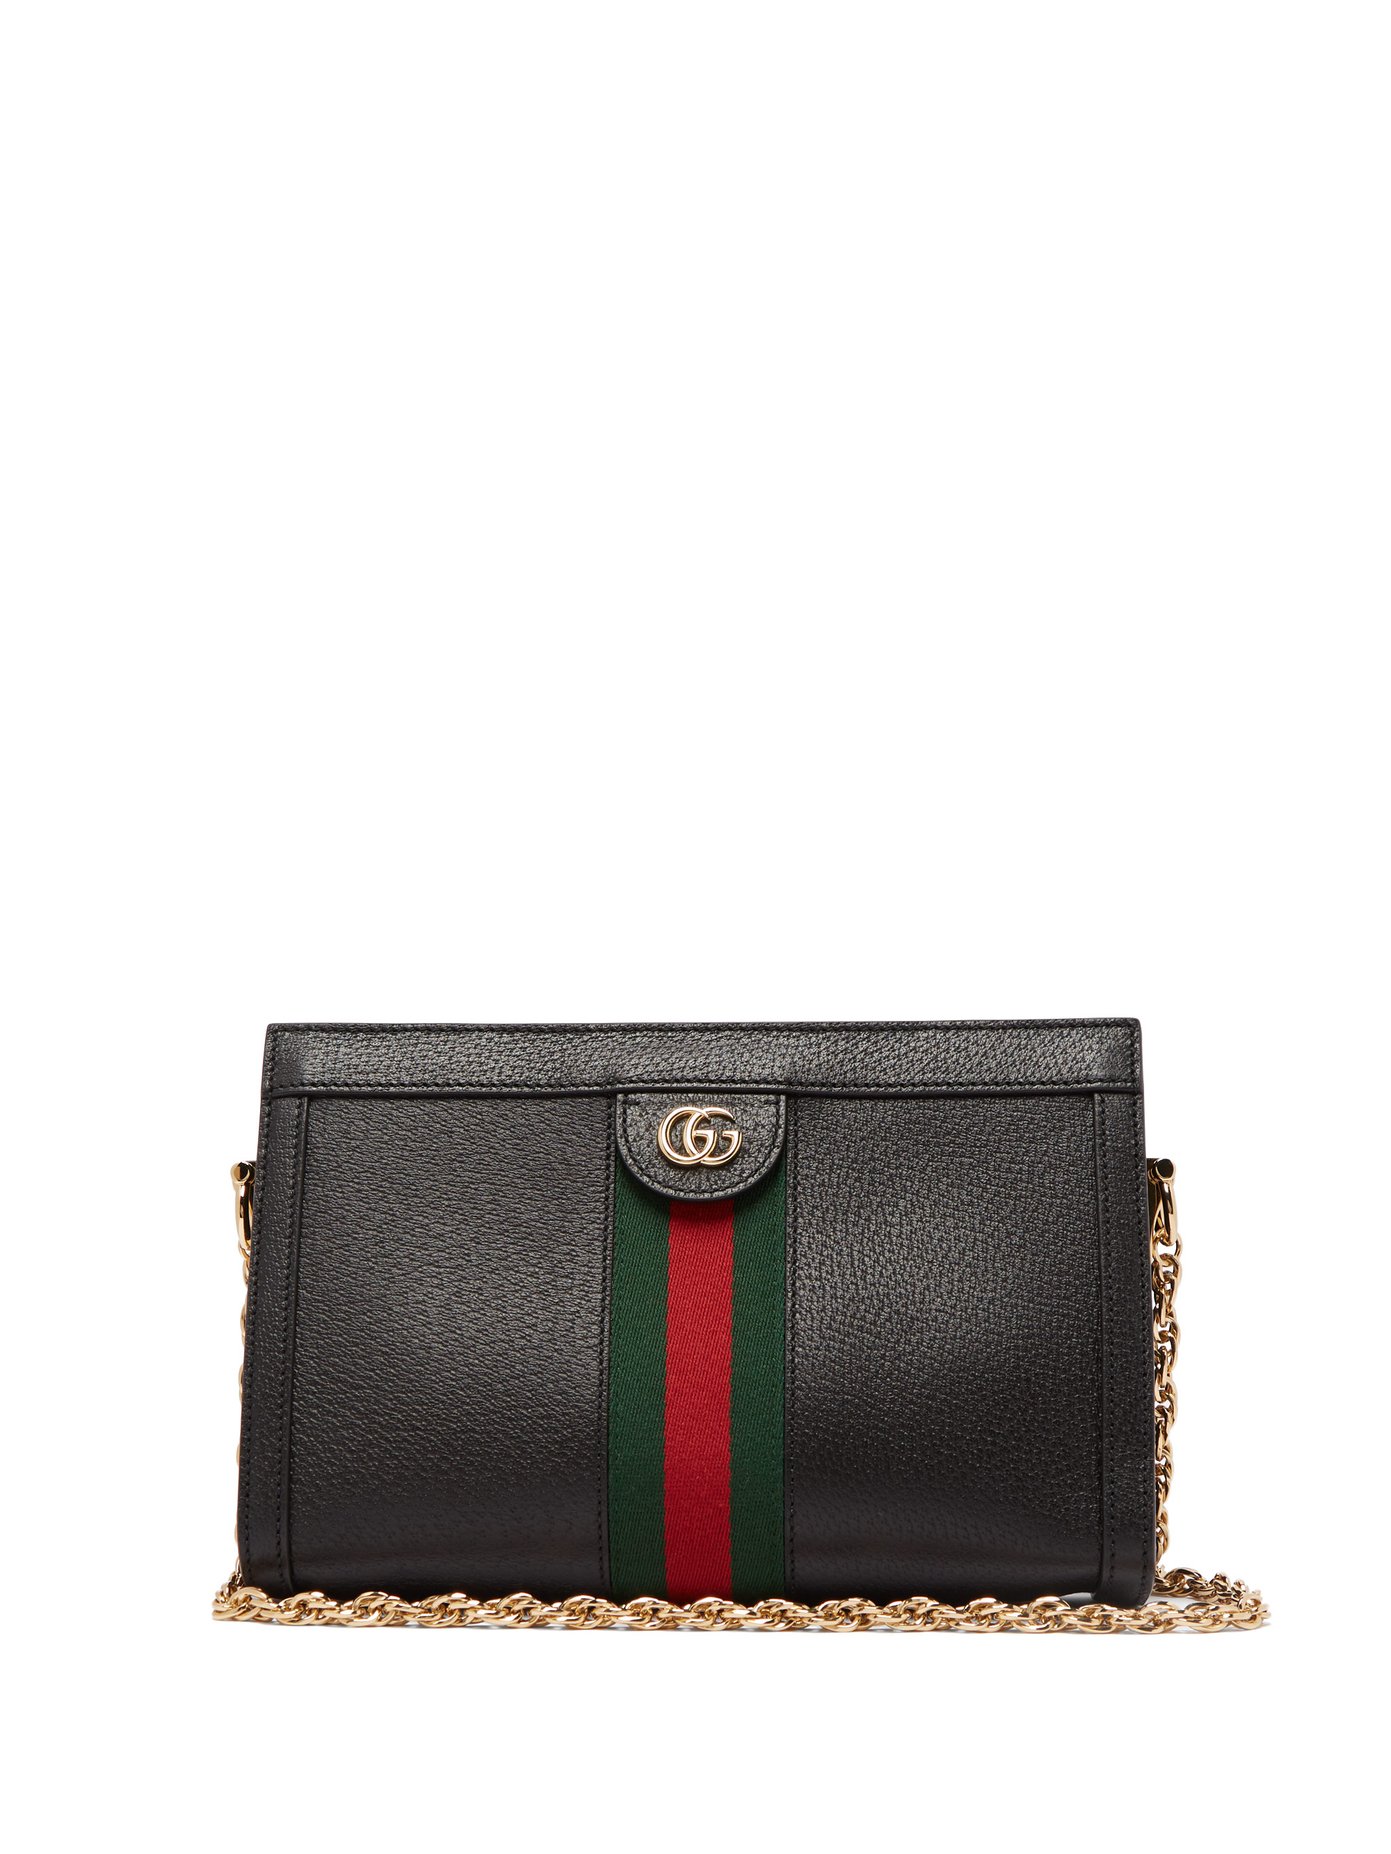 gucci bag with stripe